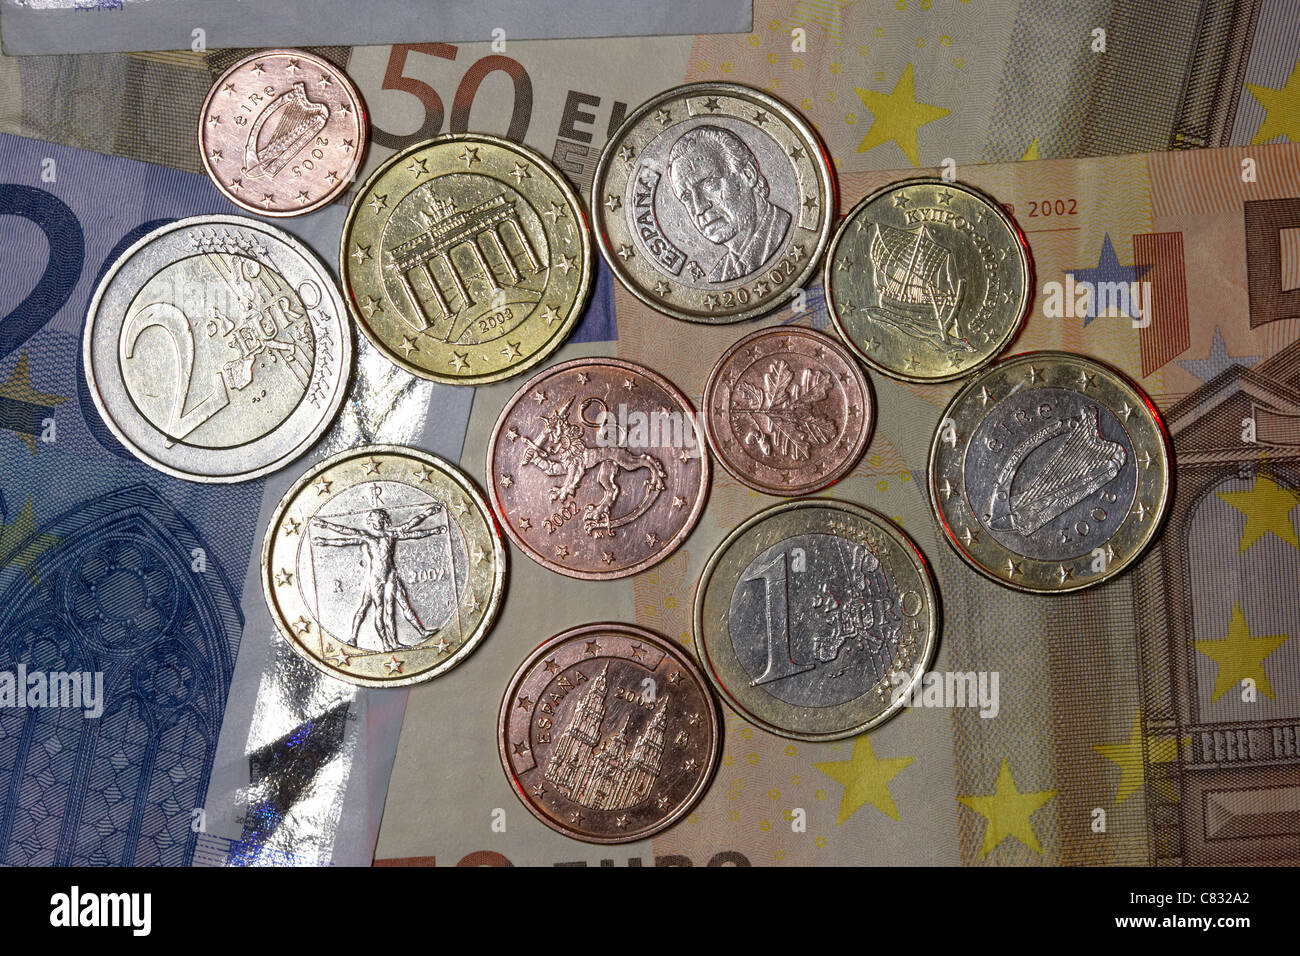 various countries euro banknotes and coins euros from spain italy ireland germany finland cyprus Stock Photo